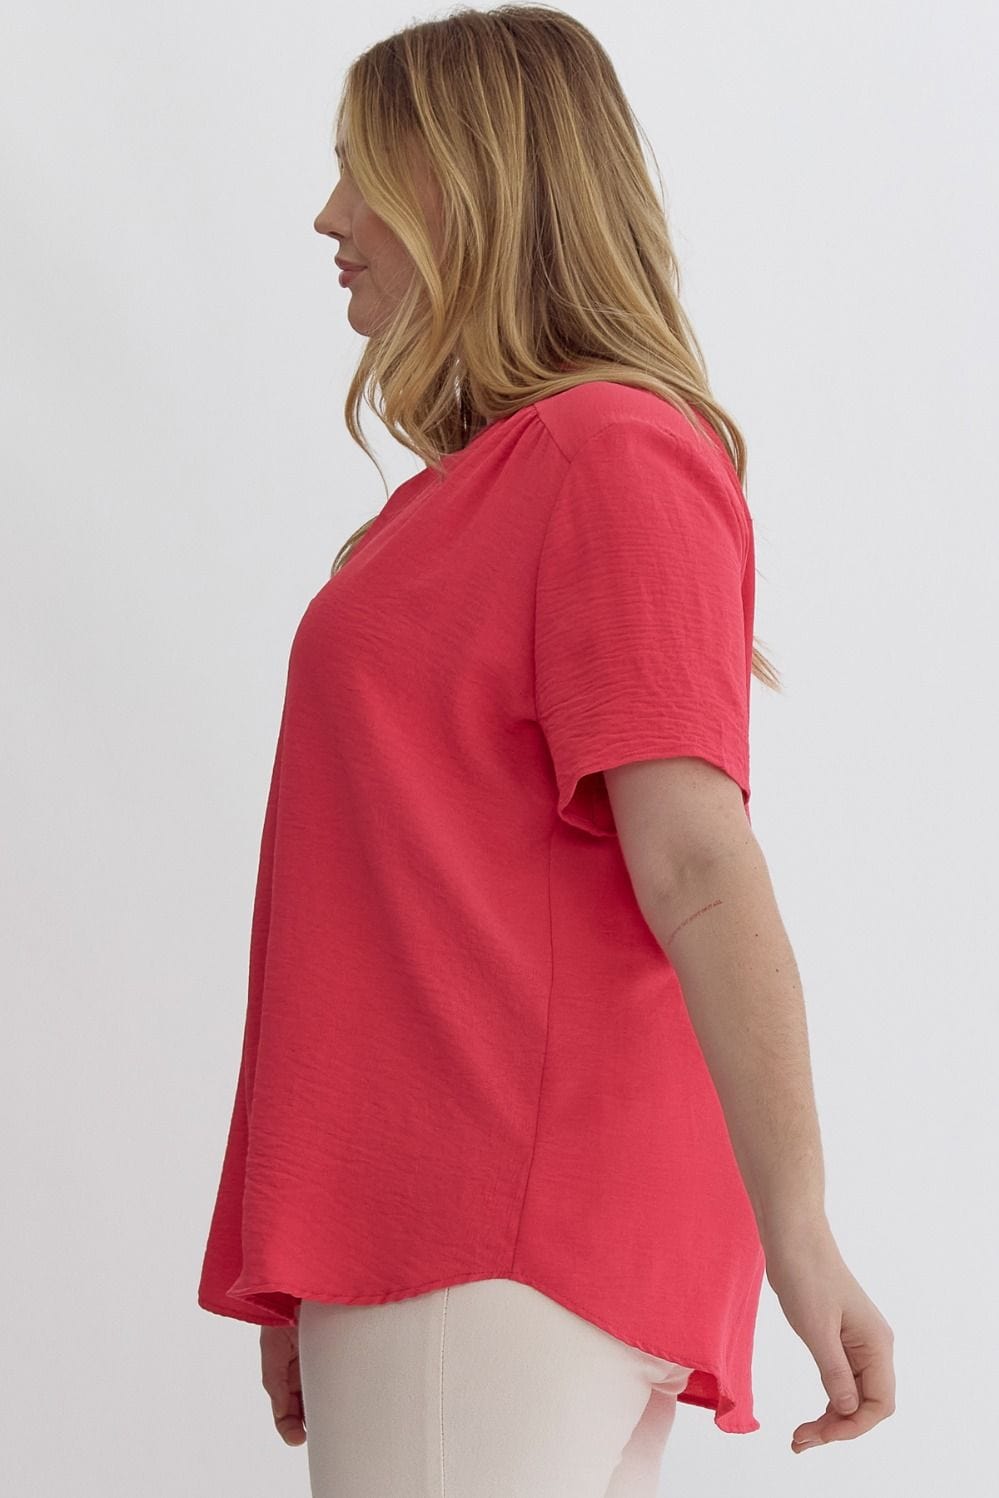 Red Short Sleeve Top | XL-2X Entro Plus Size